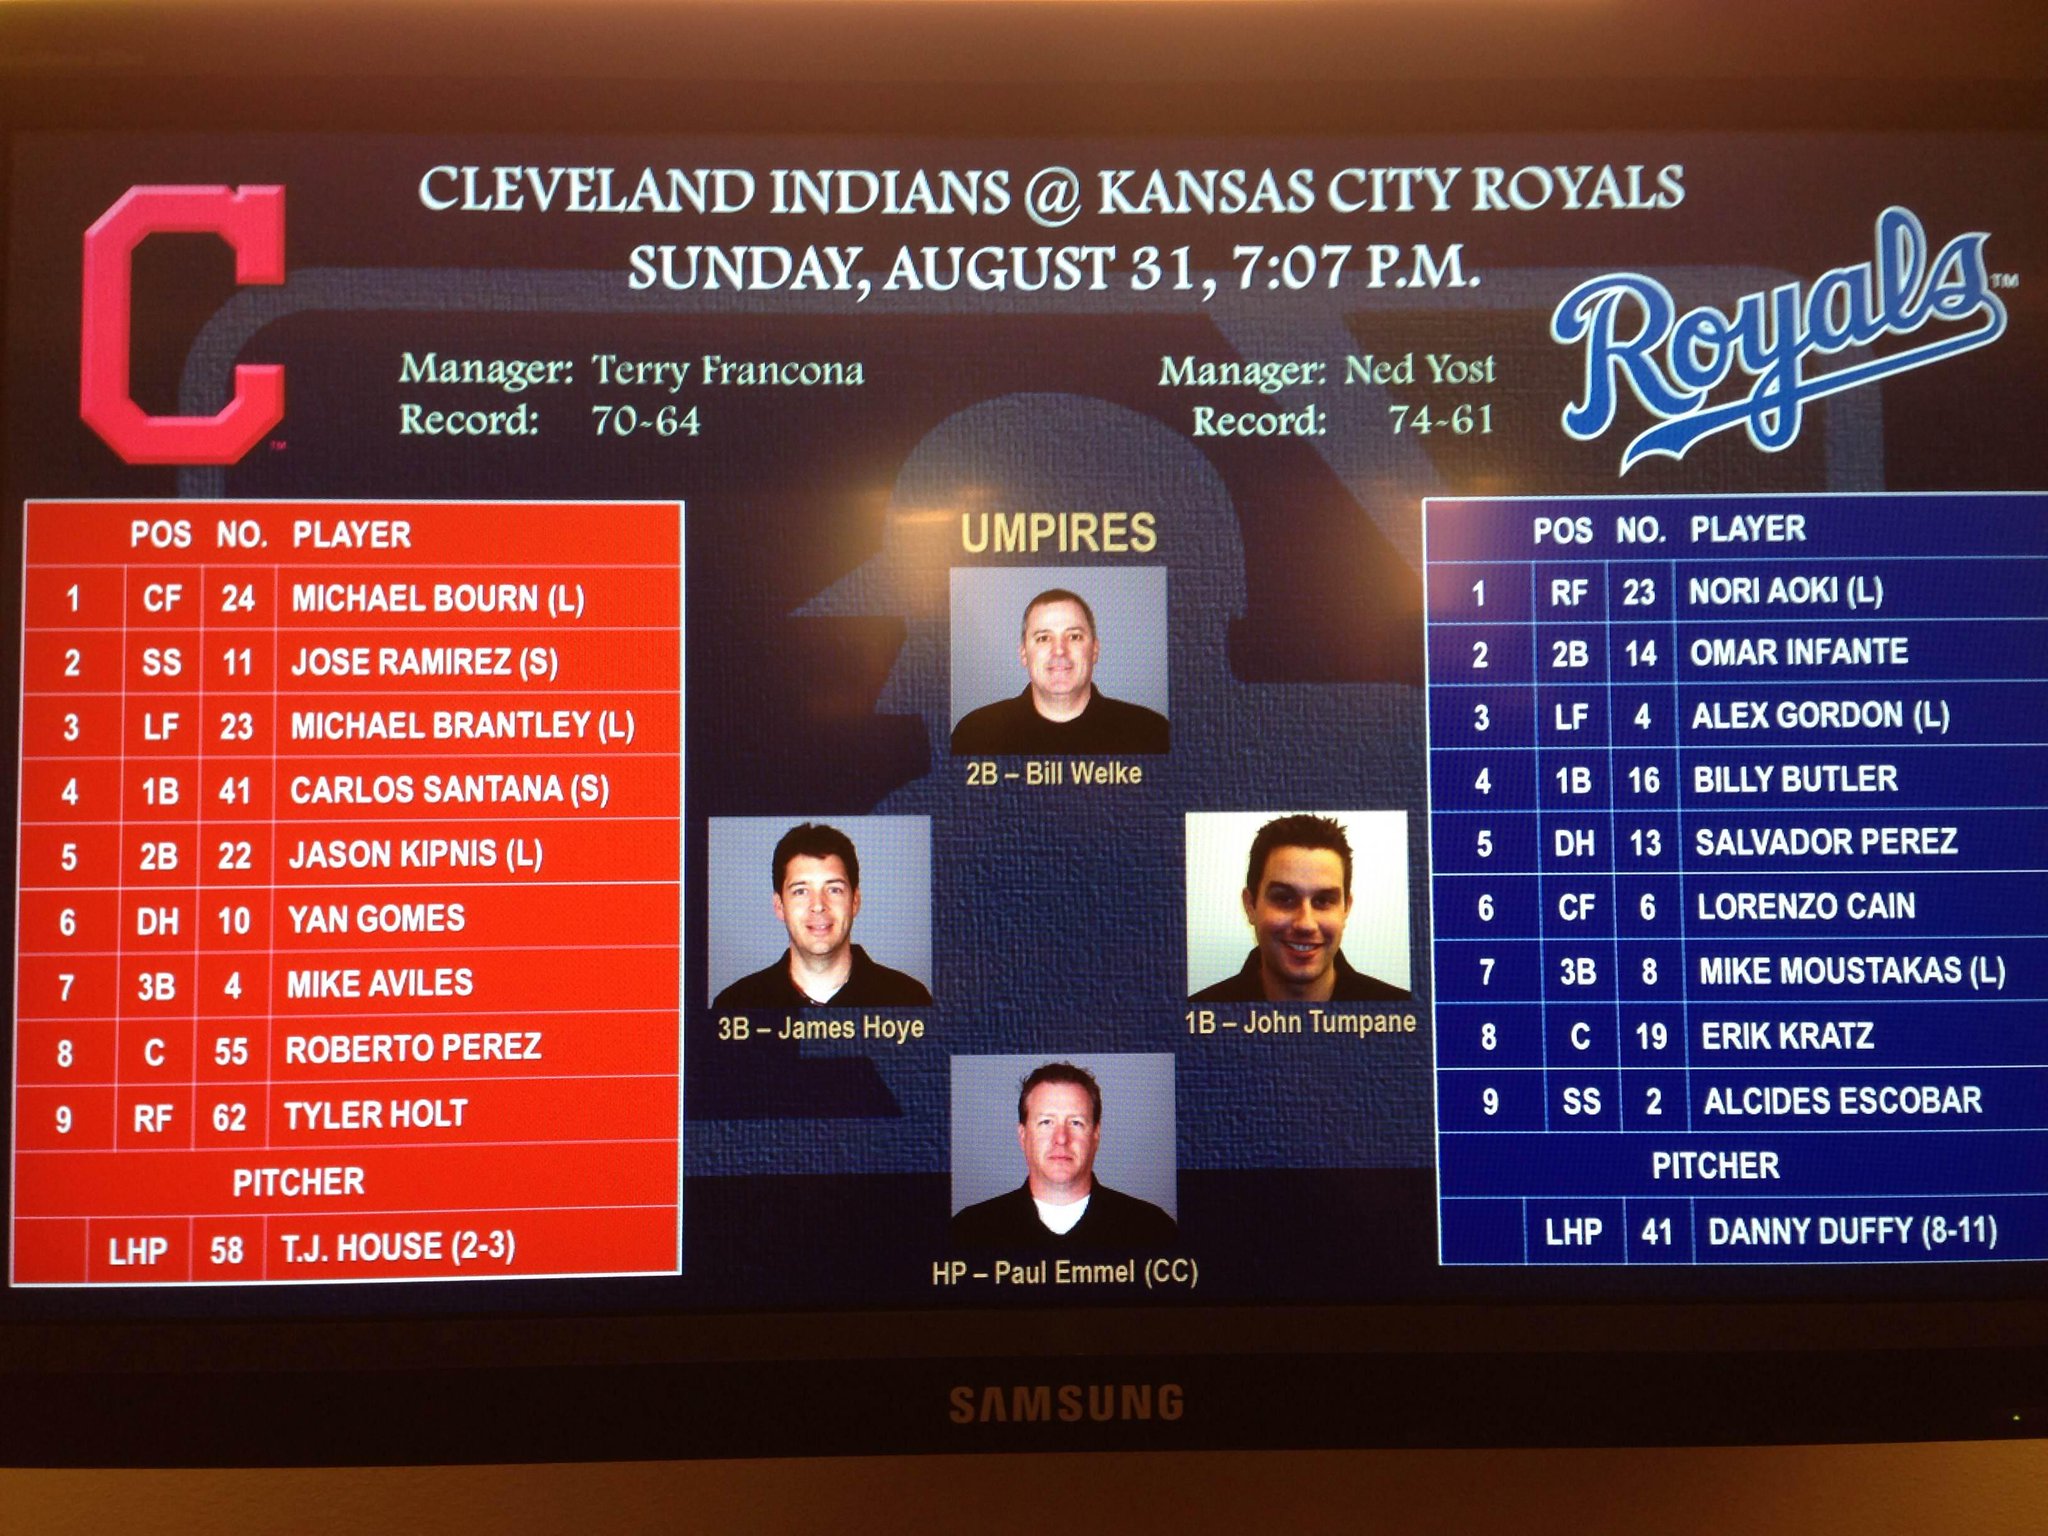 Kansas City Royals on Twitter "Here's how the Royals and Indians will